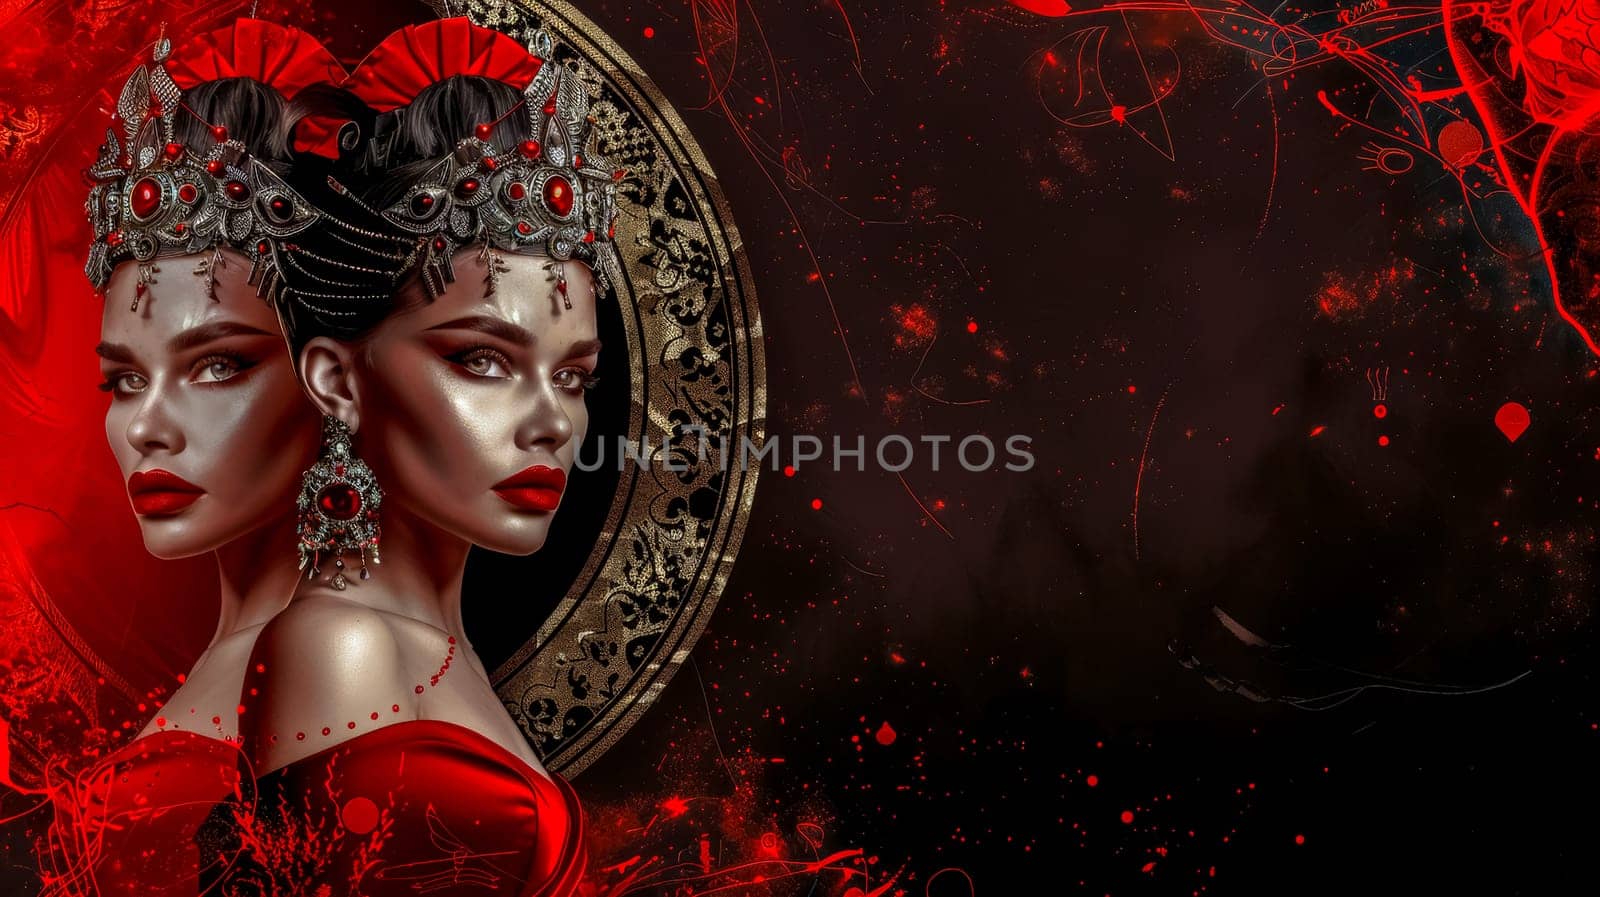 Artistic and elegant gothic queens in red with regal makeup and dramatic fashion, portraying a mysterious and symmetrical allure